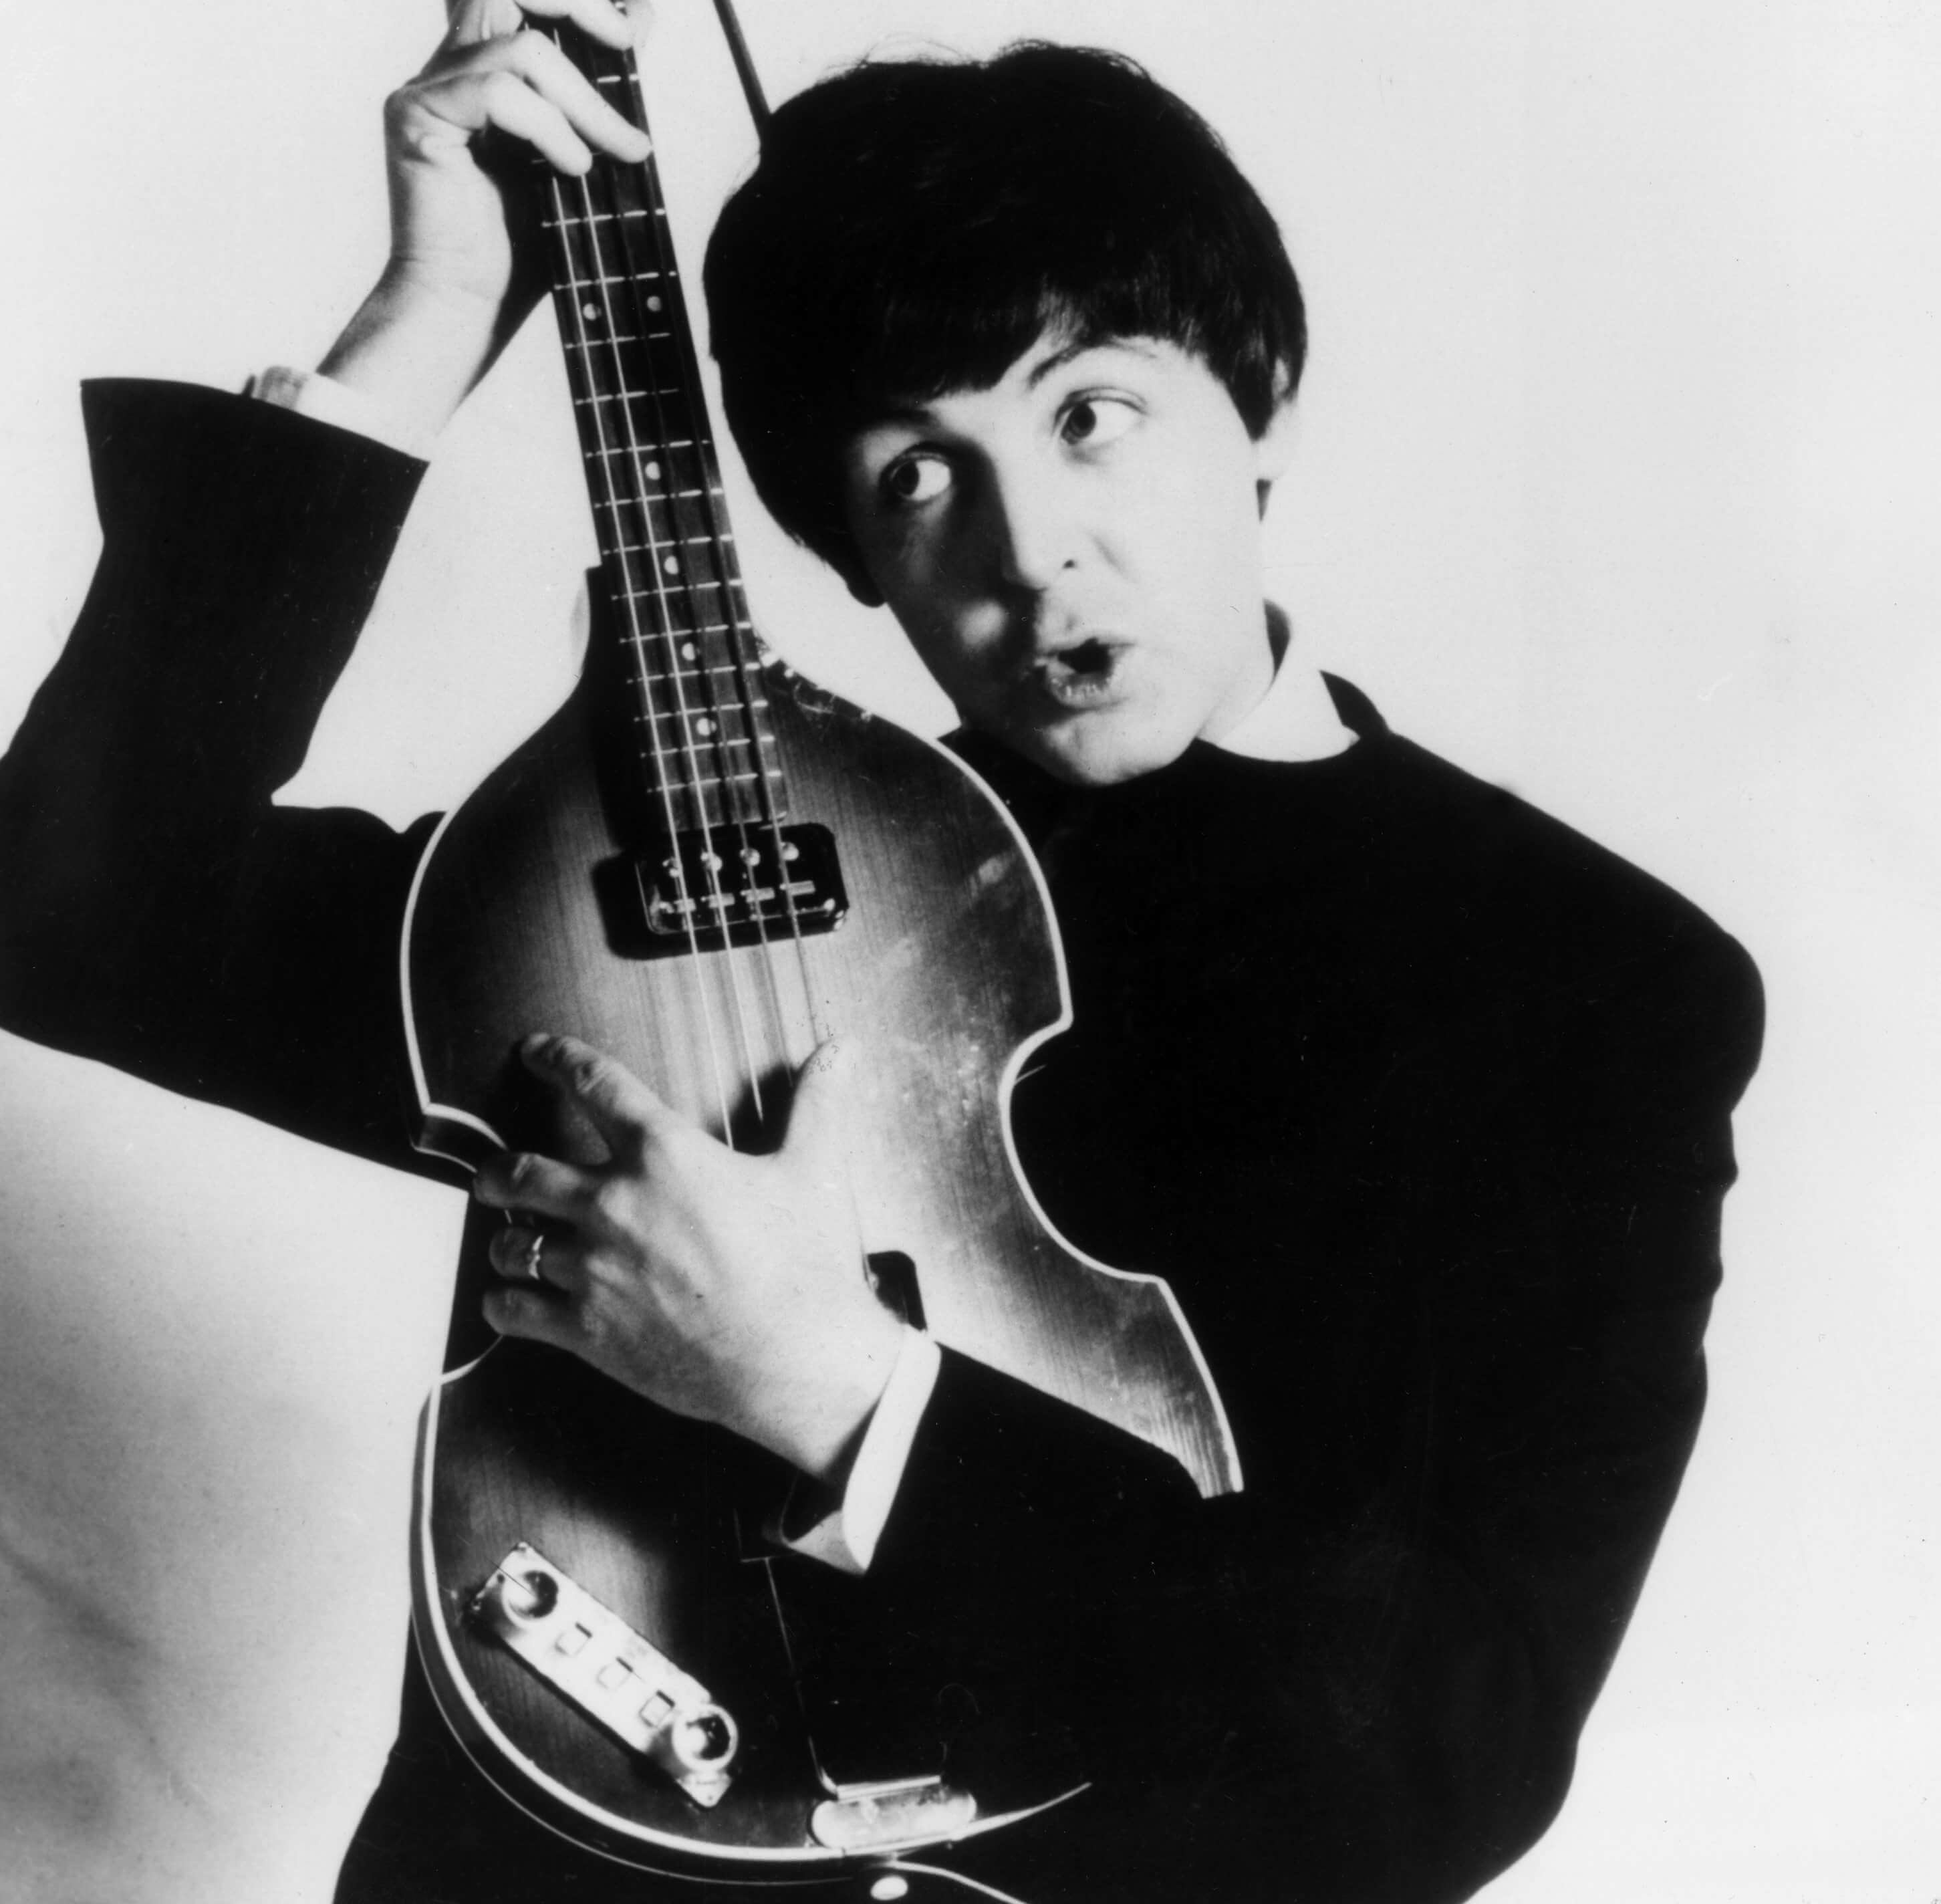 1 Paul McCartney Song Sold 100,000 Copies a Day - NewsFinale